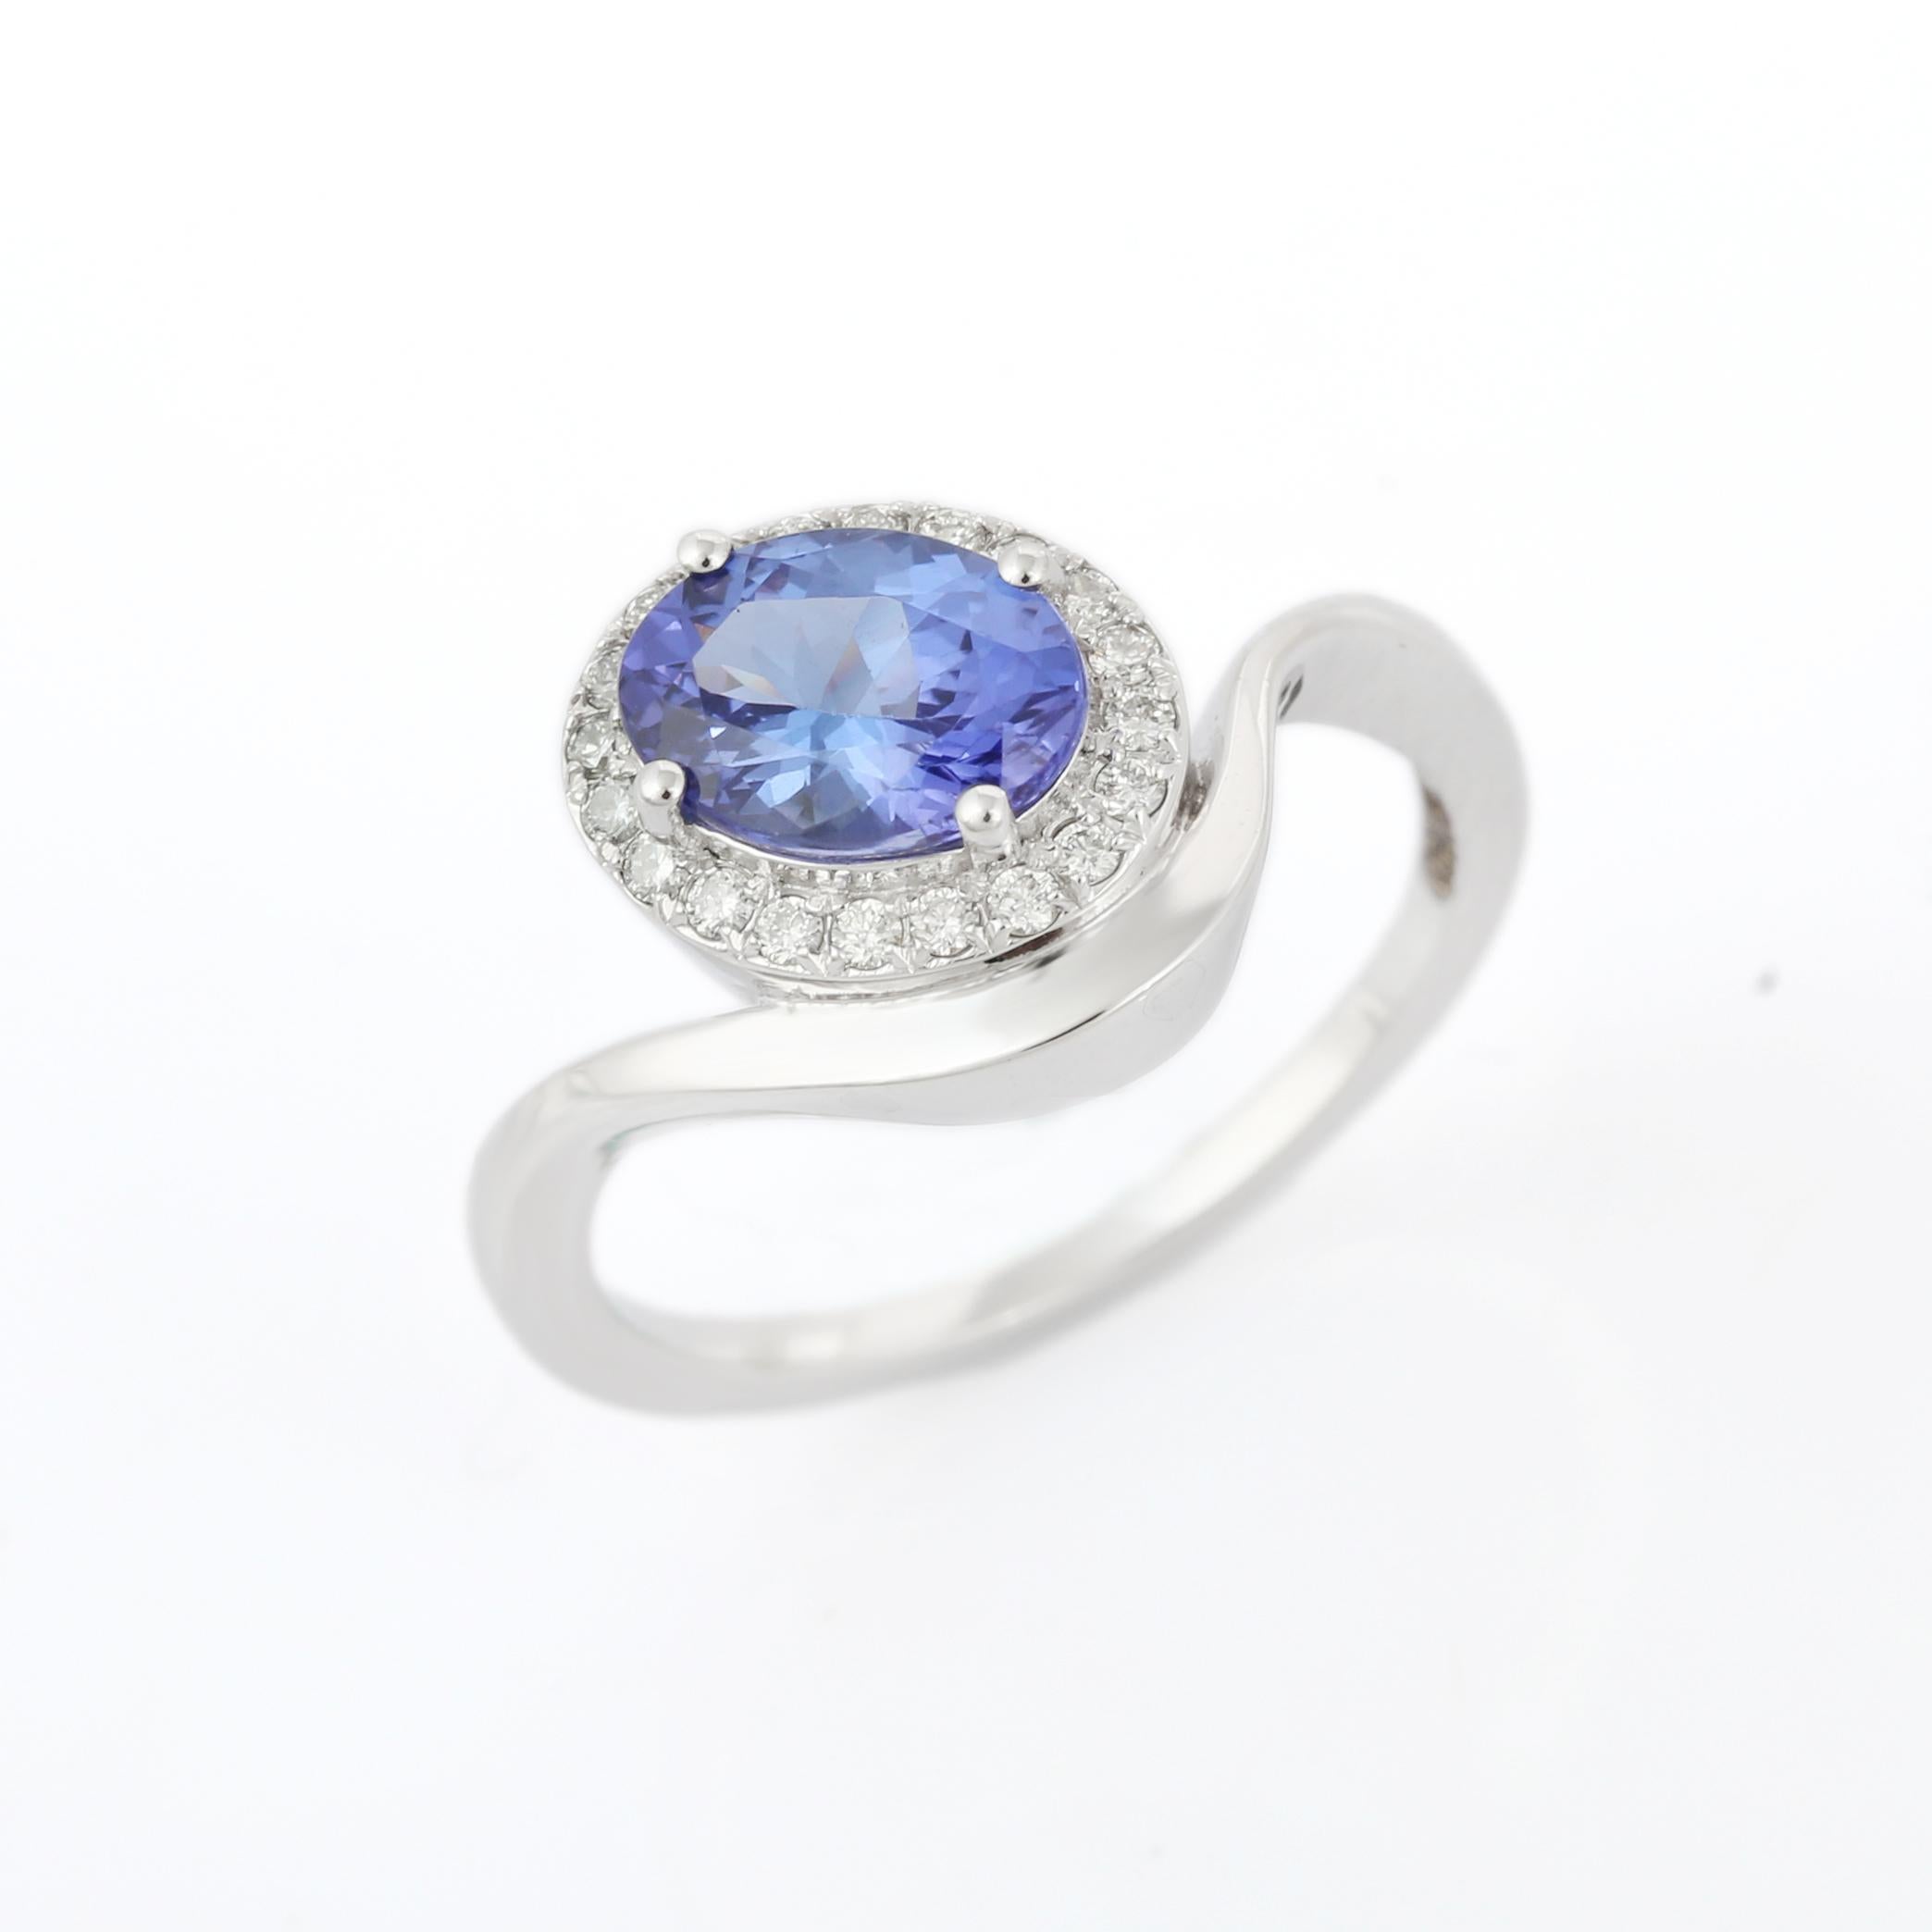 For Sale:  Natural Tanzanite and Diamond Ring in 18k Solid White Gold   4